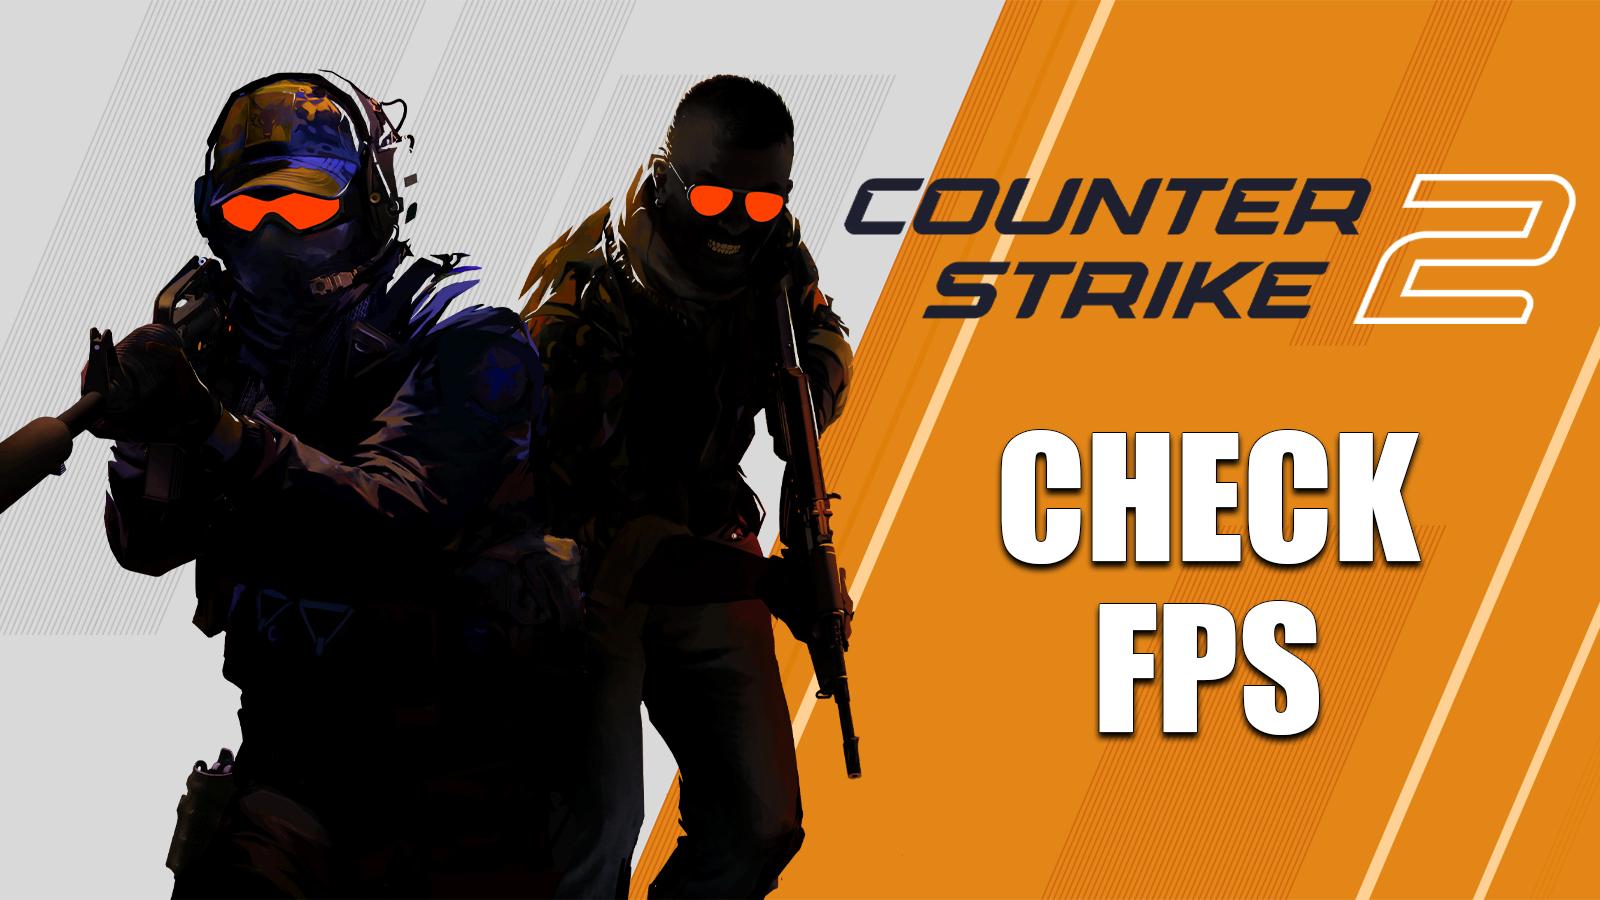 Skins (Counter-Strike: Condition Zero) > Packs (Page 2)